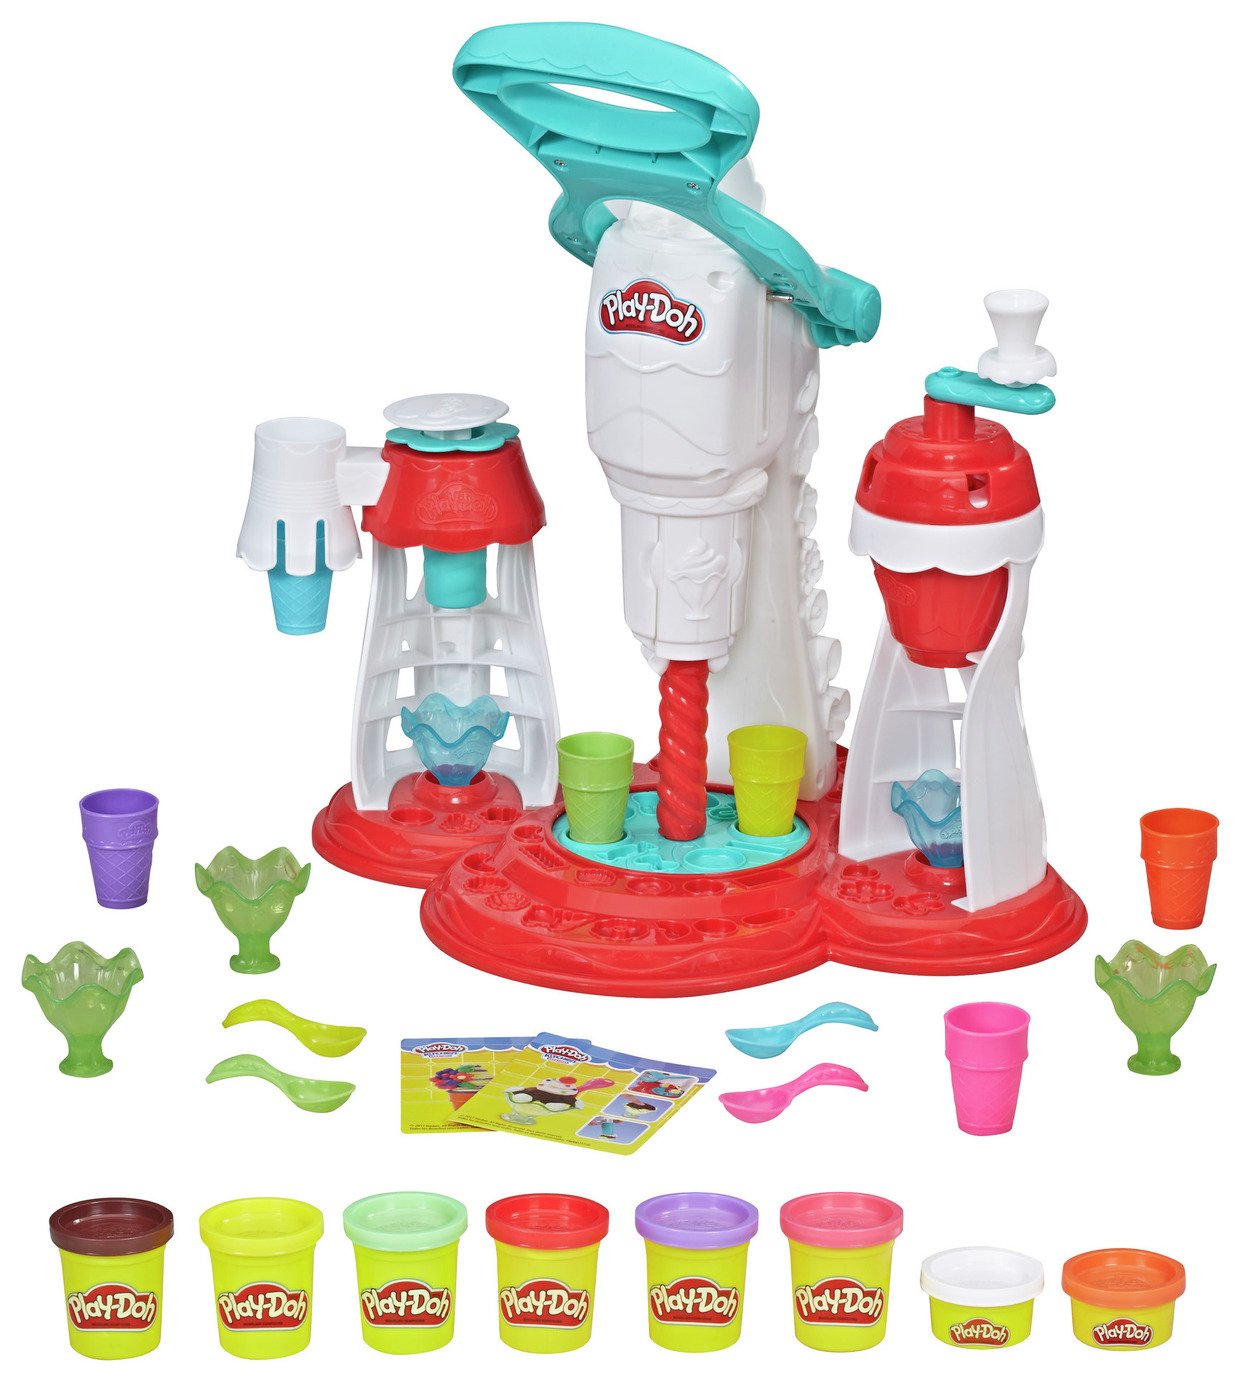 Play-Doh Kitchen Creations Ultimate Swirl Ice Cream Maker Review